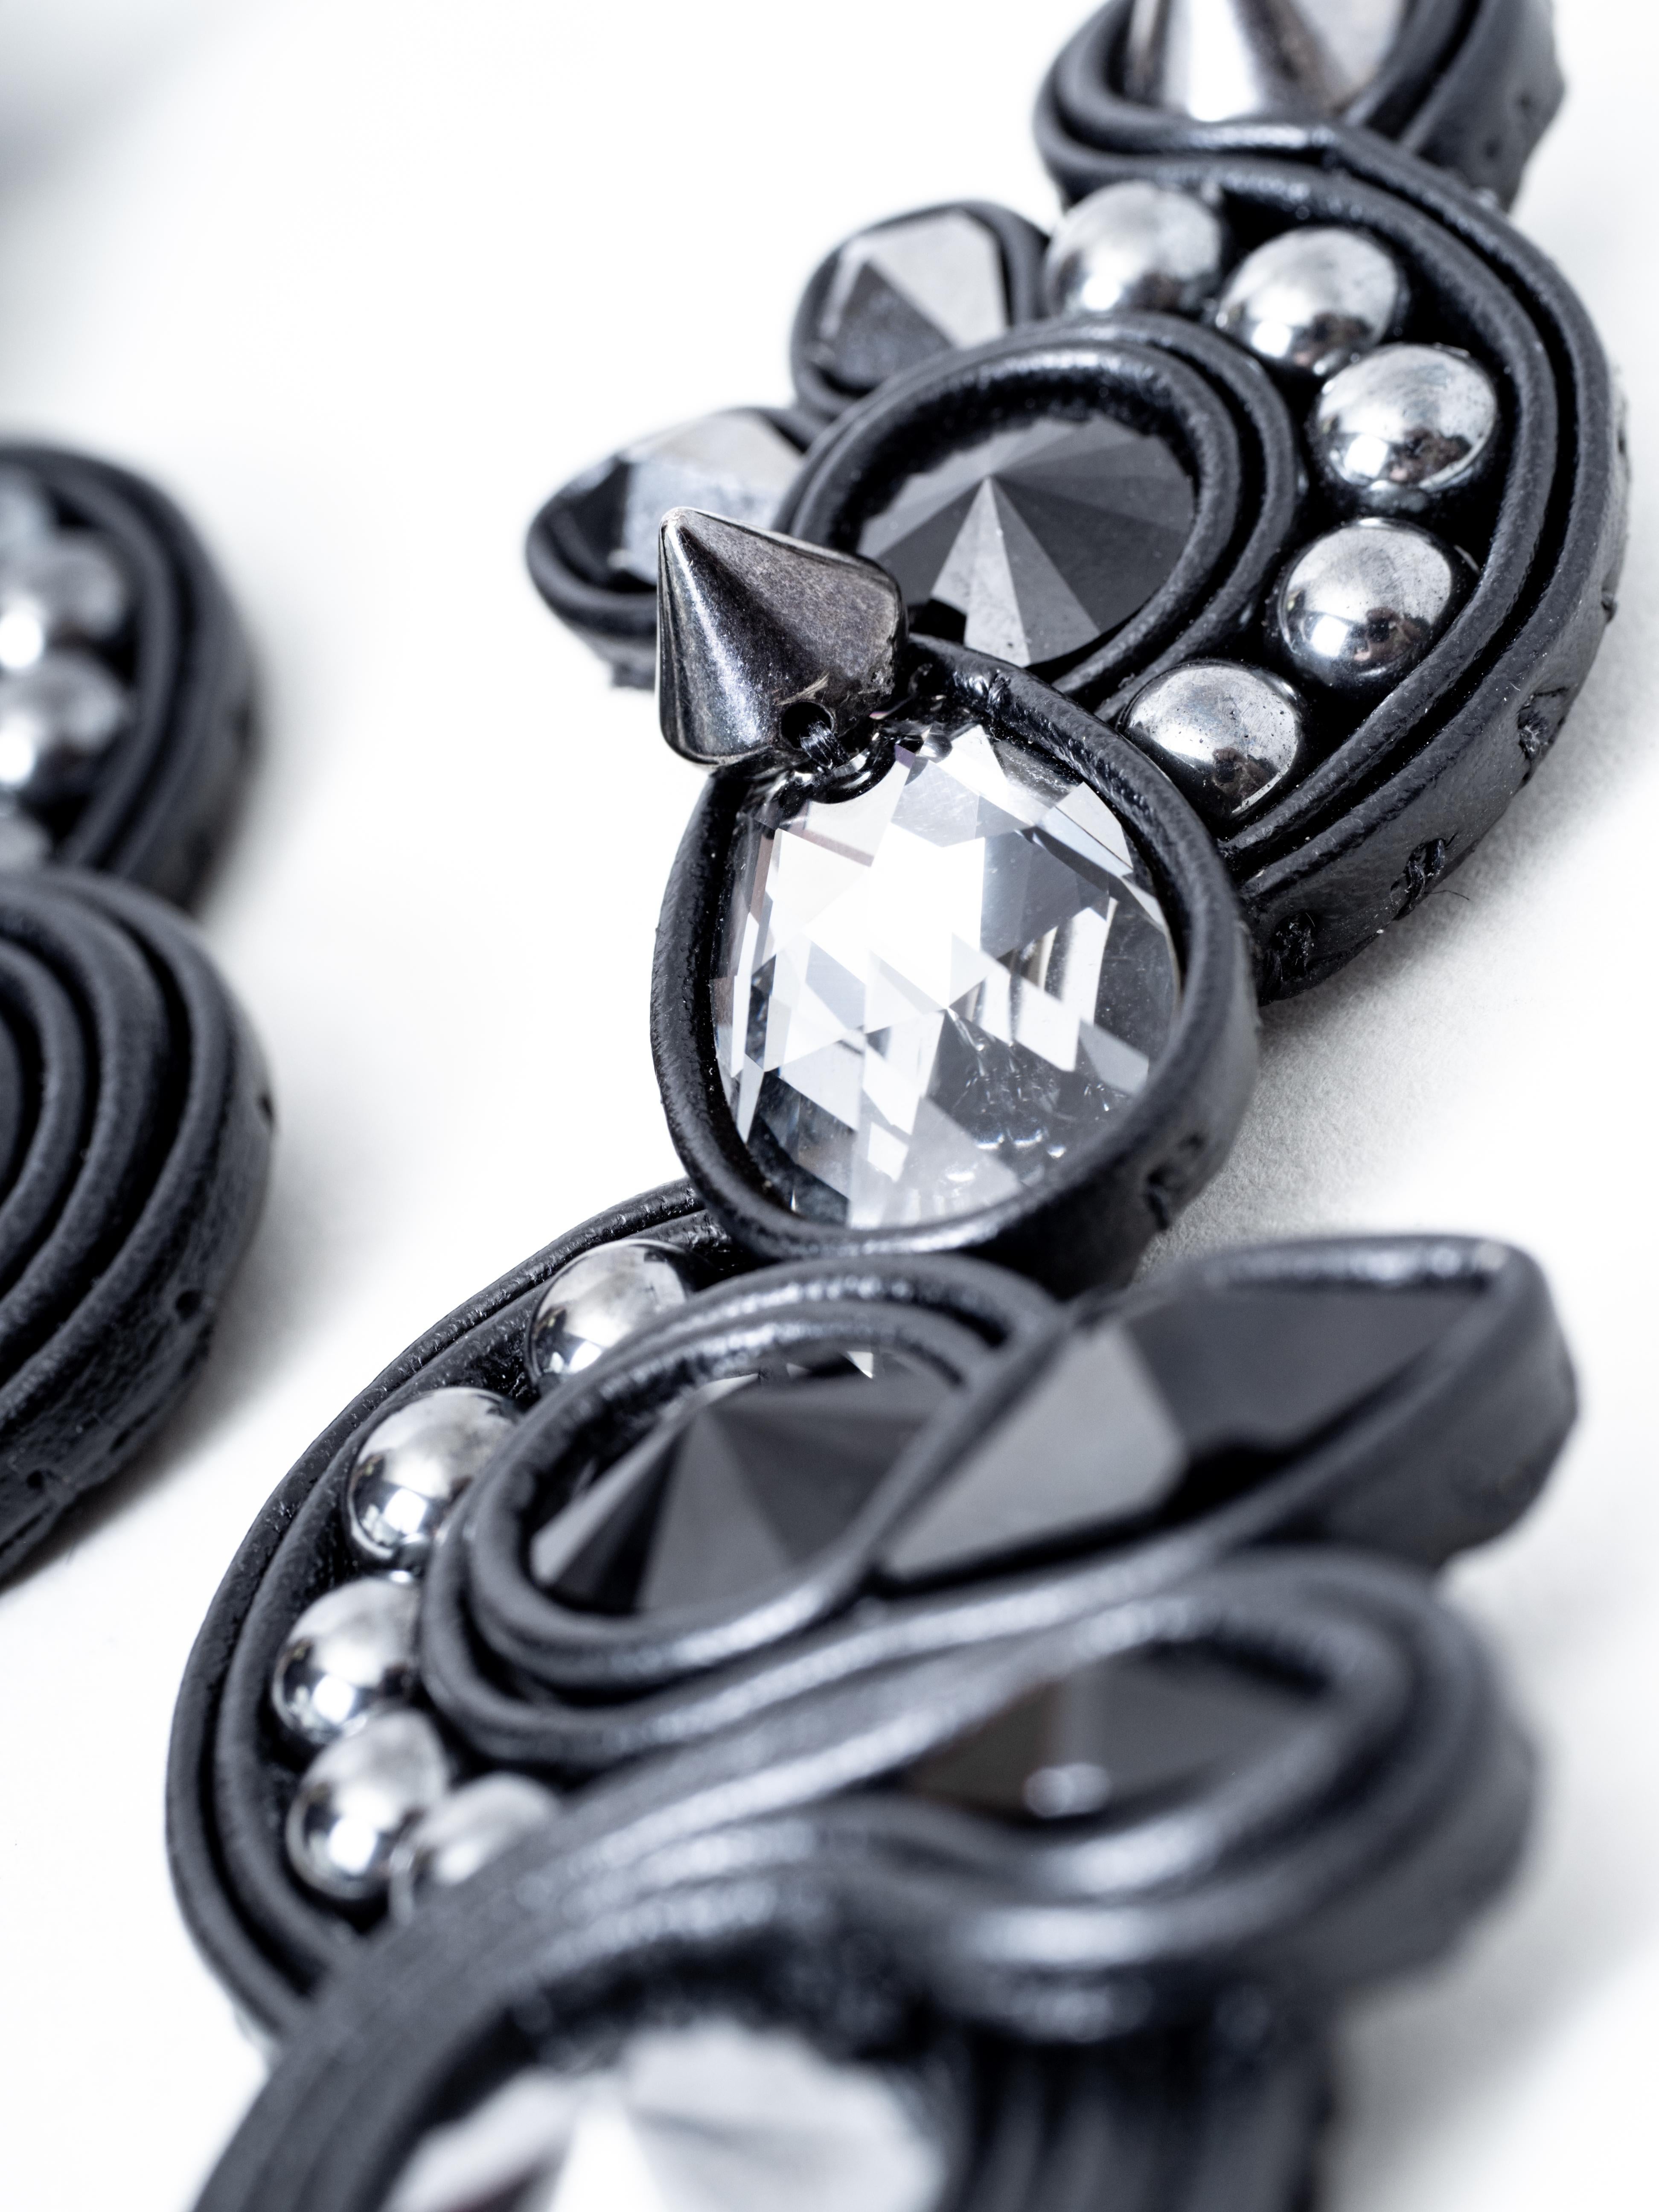 Designed by Julie Eulalie exclusively for Maison HOLLEVILLE these clip earrings are made with leather, faceted crystal cabochons and Hematite.
A spectacular statement.
Julie finally chooses to express her talent through 